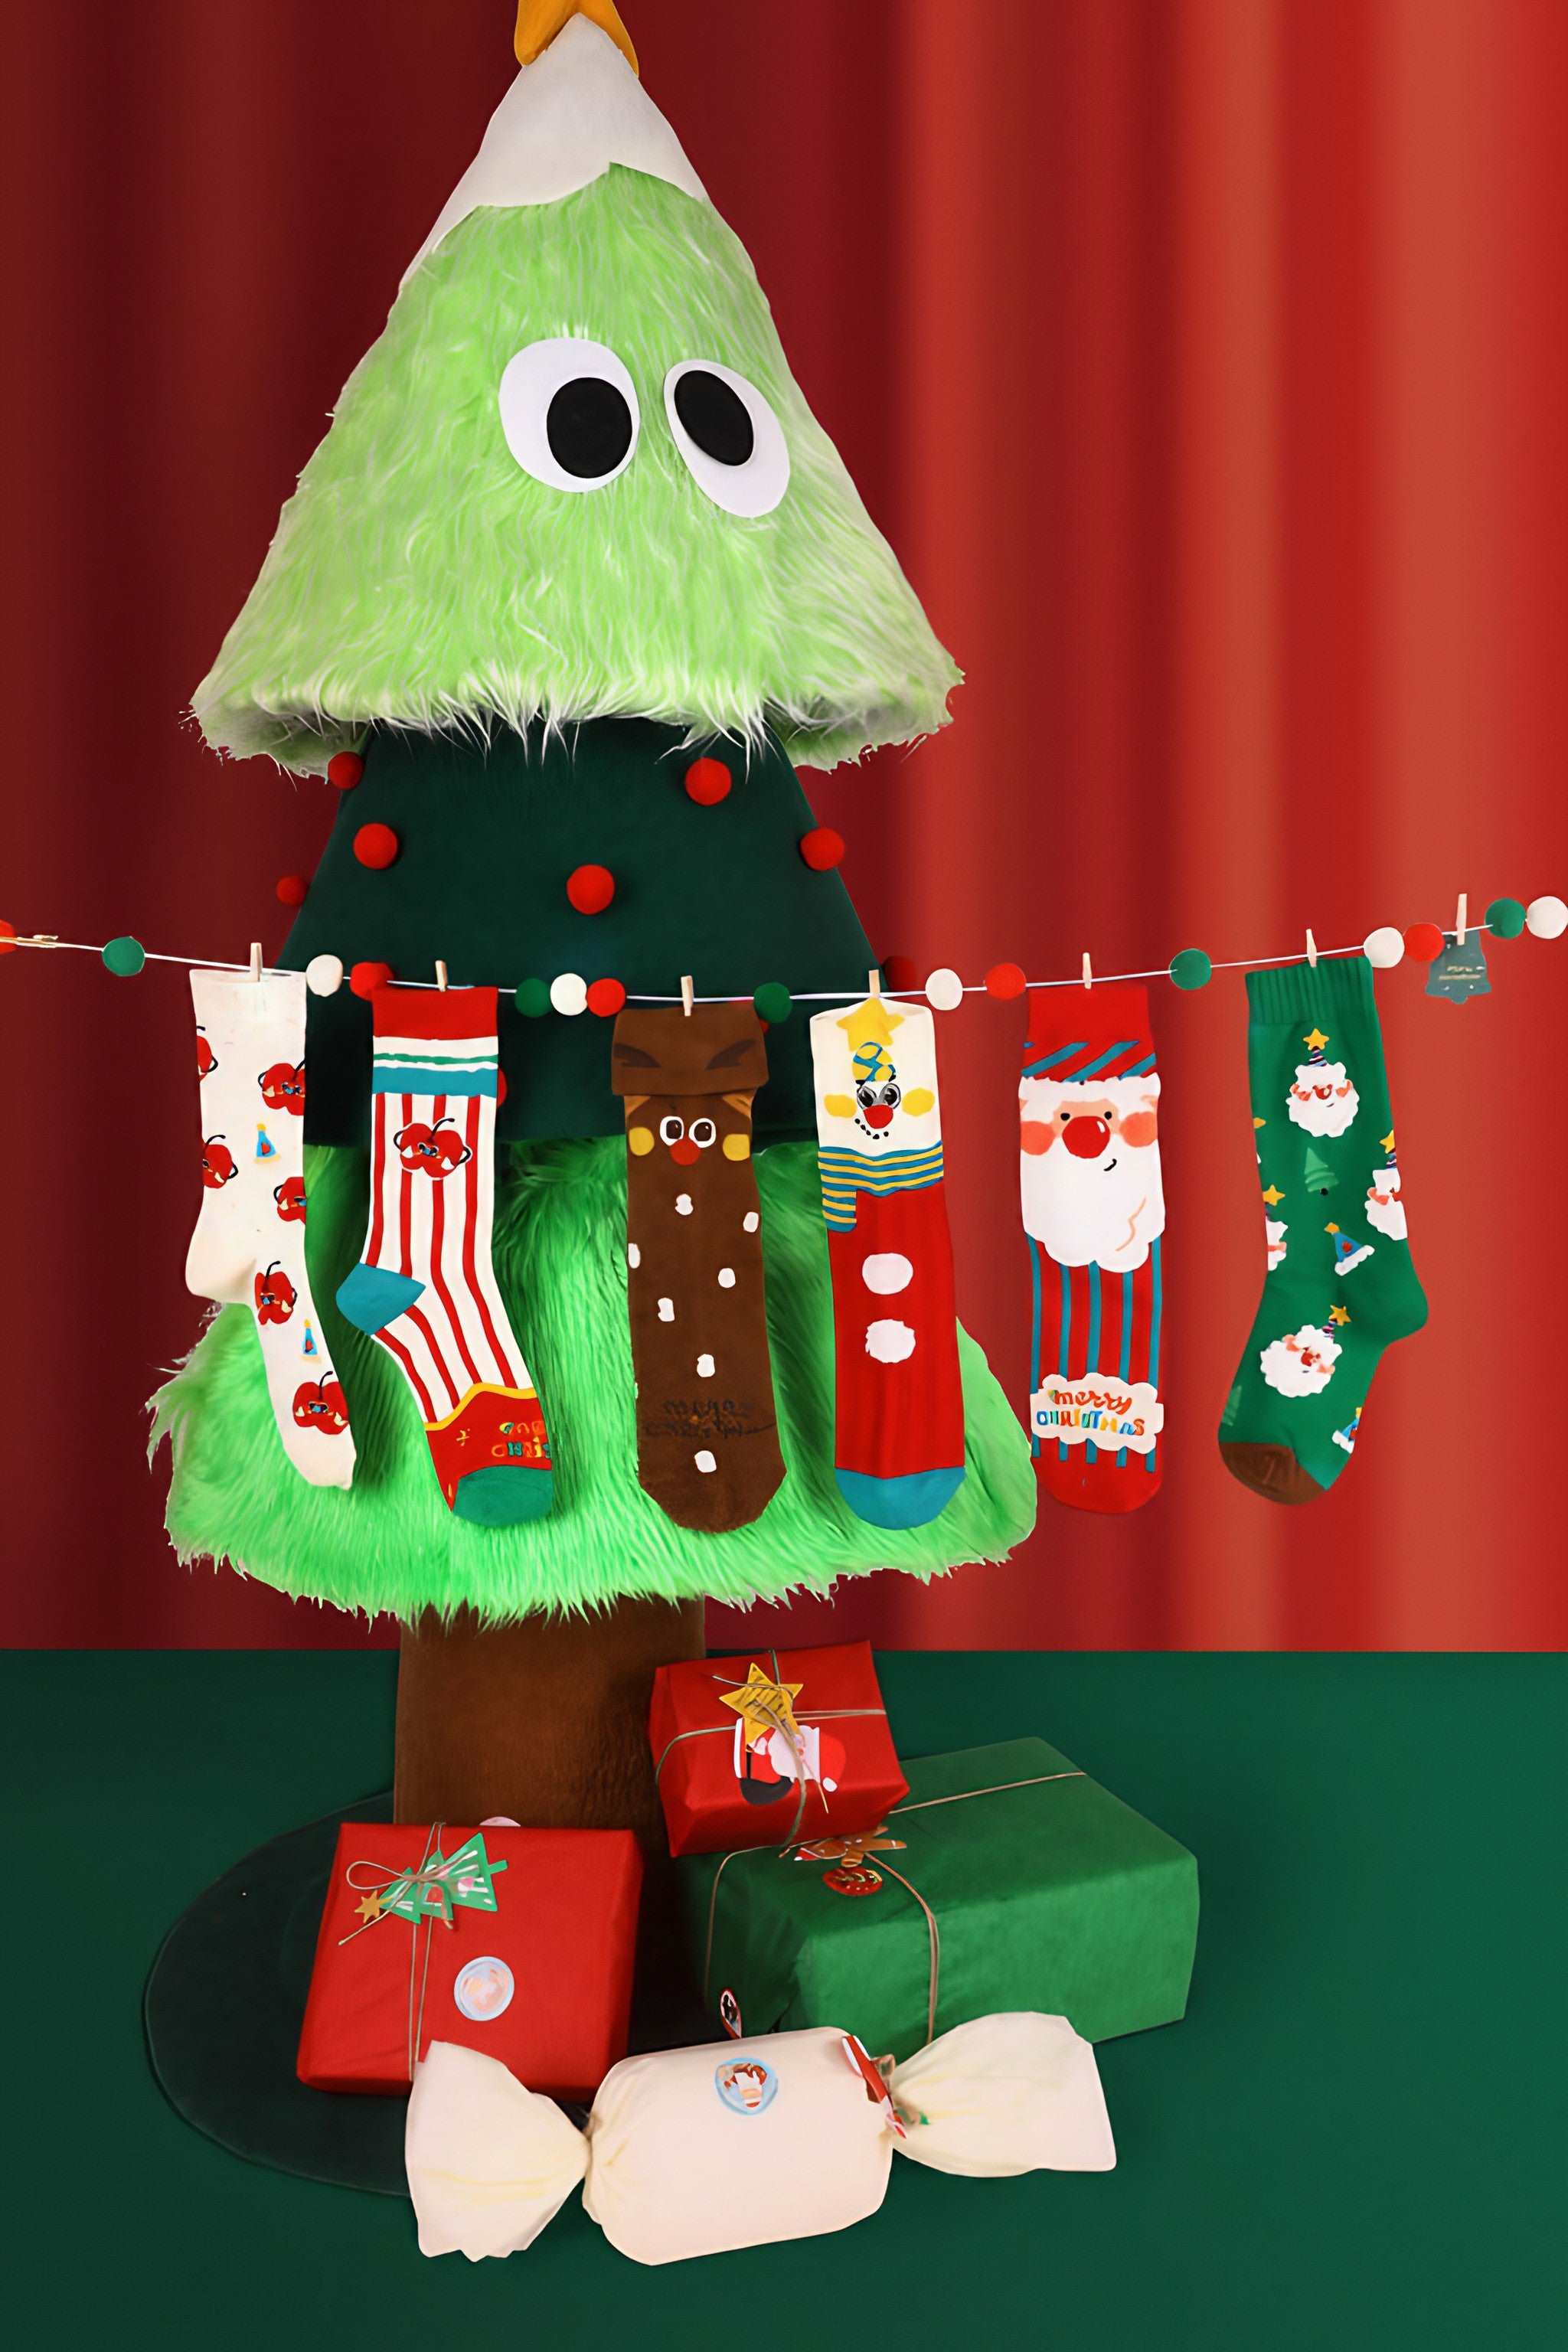 Decorative Christmas stockings hung with care on a festively adorned tree